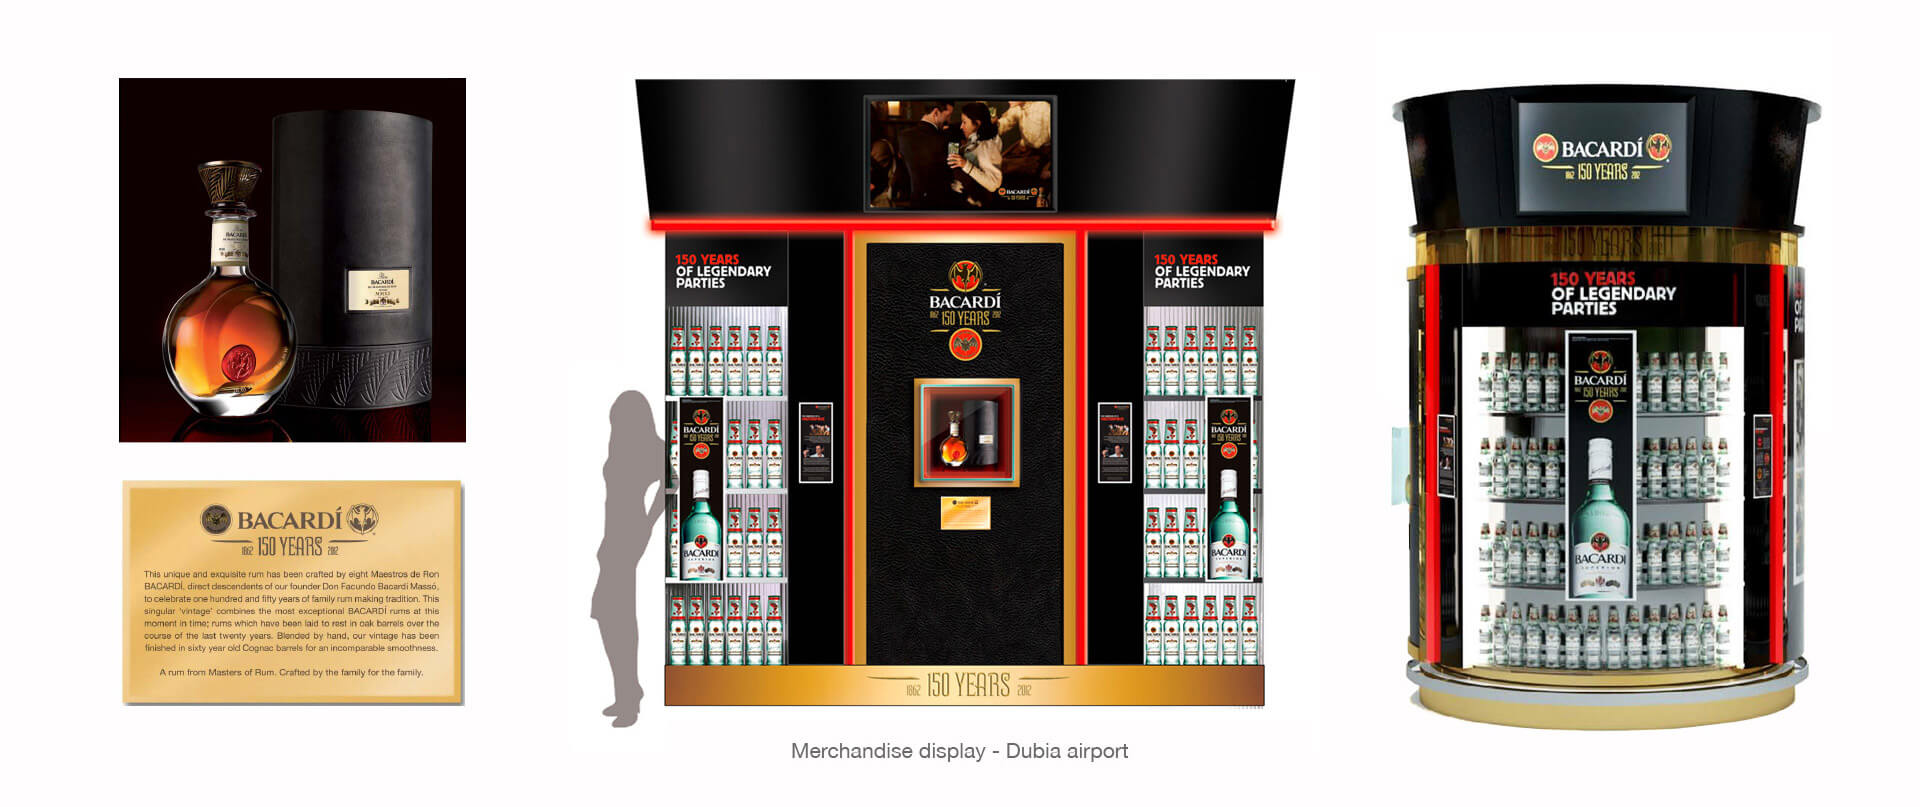 Bacardi 150 Years celebration merchandising system design for Duty Free Dubia Airport